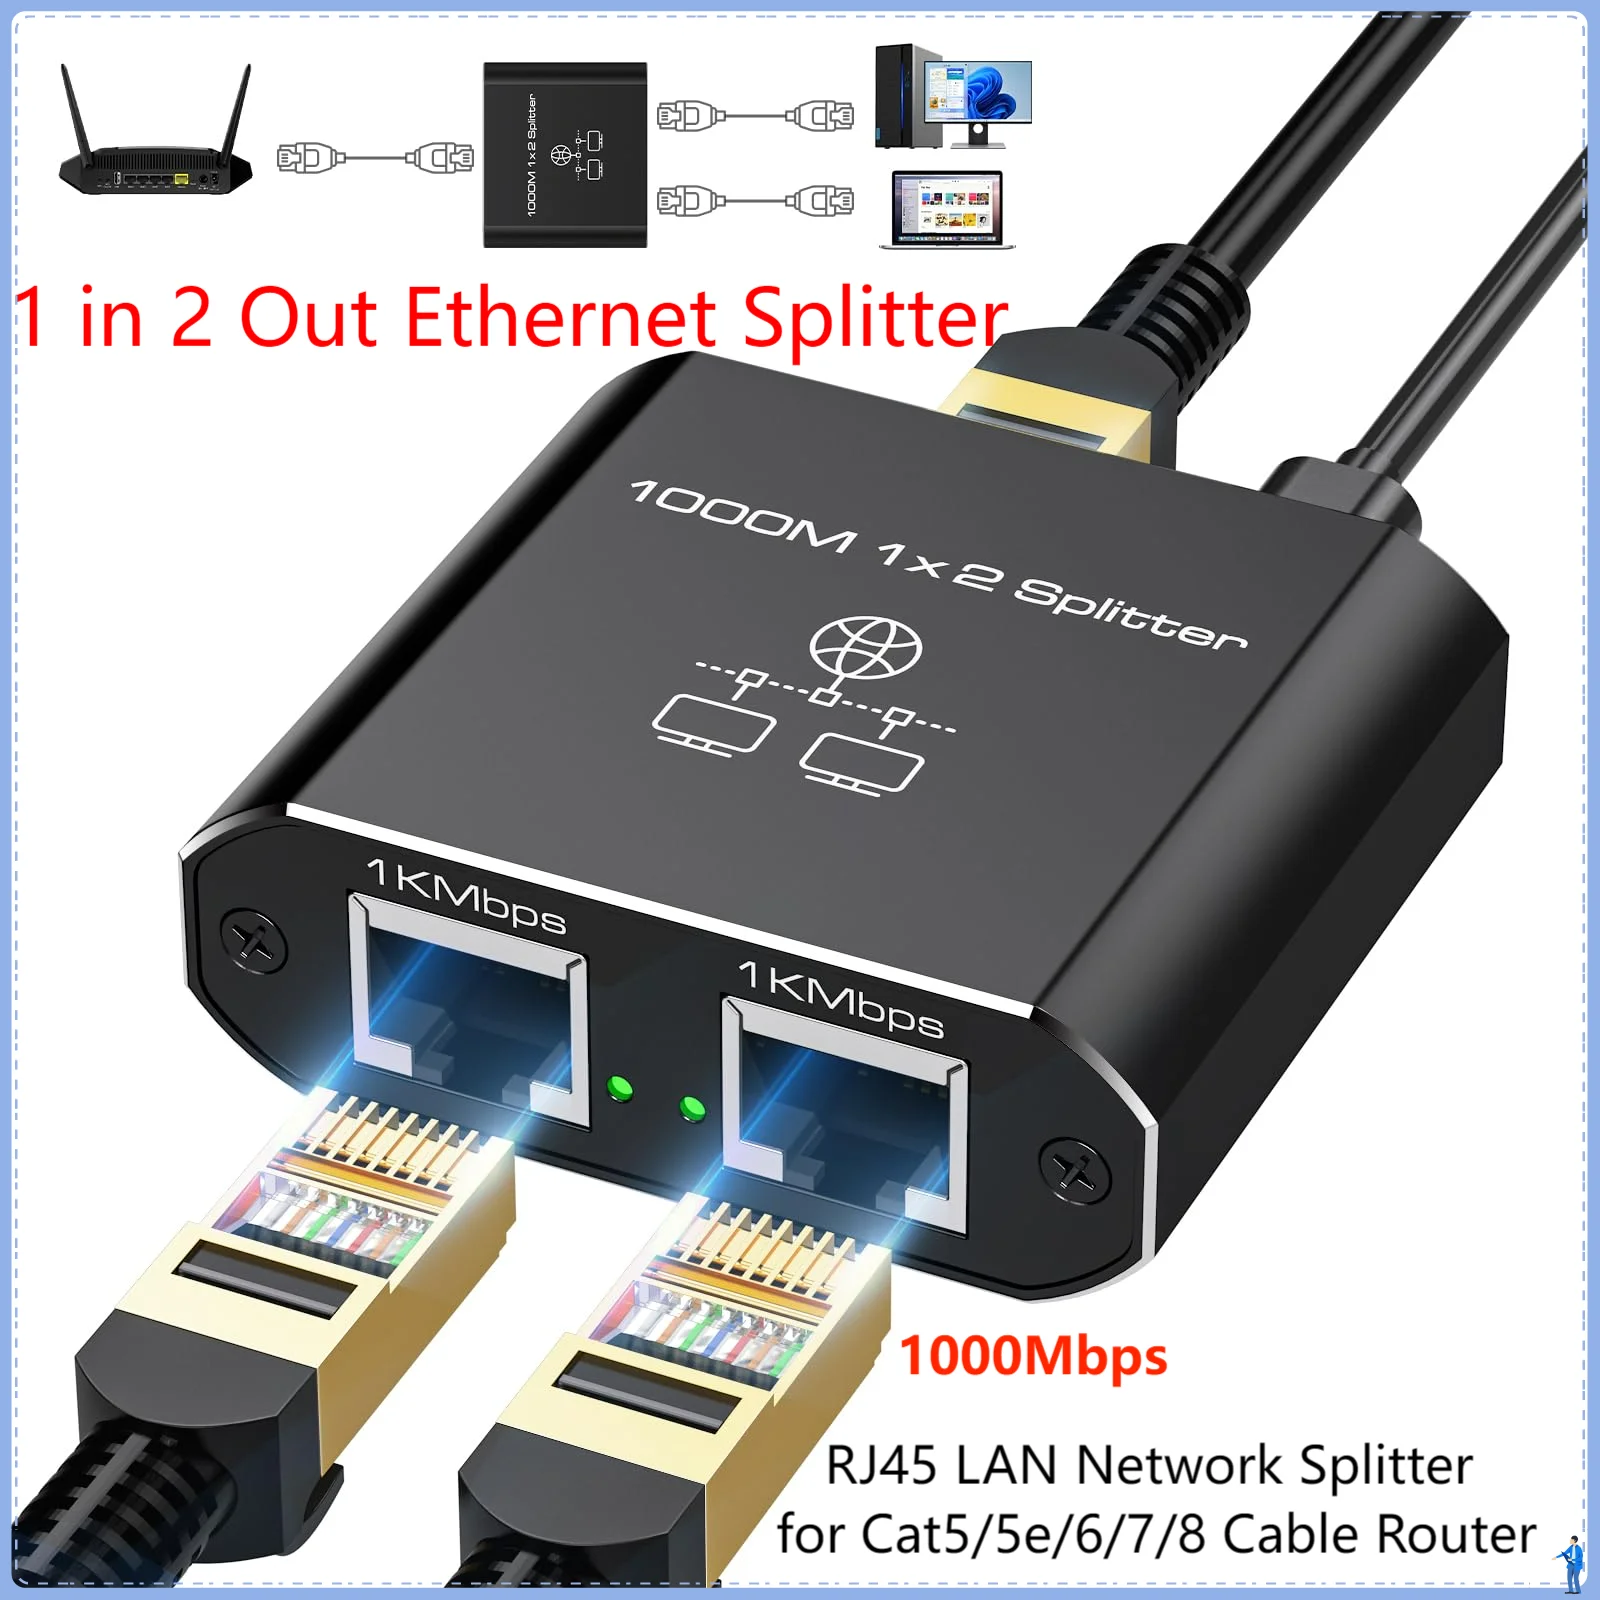 ̴ й  1000Mbps Ʈũ й, RJ45 LAN й , Cat5, 5e, 6, 7/8  ͳ й, 1 in 2 Out